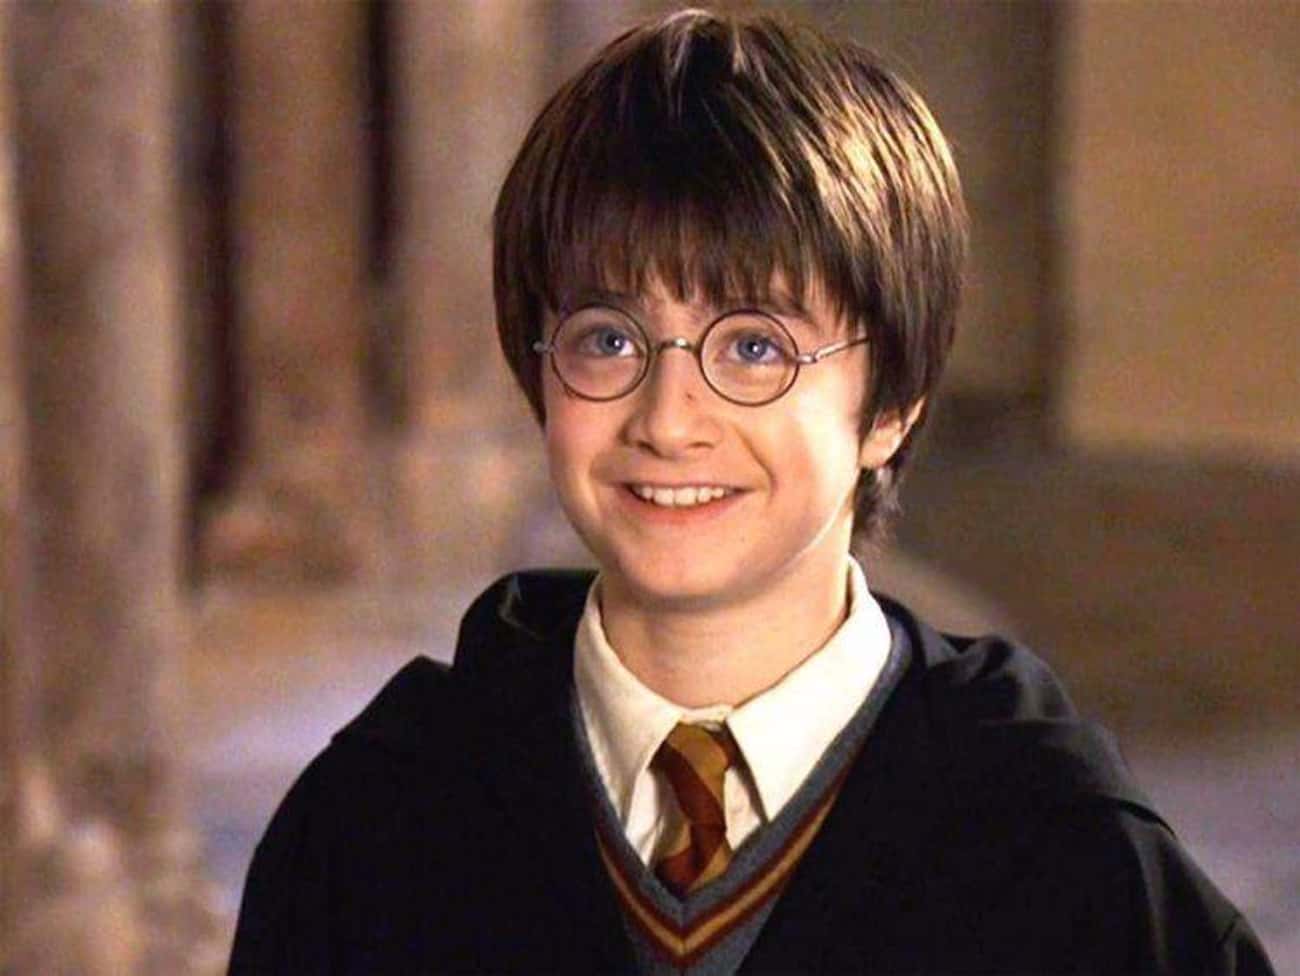 Daniel Radcliffe Was Meant To Wear Green Contacts, But They Were Extremely Painful 